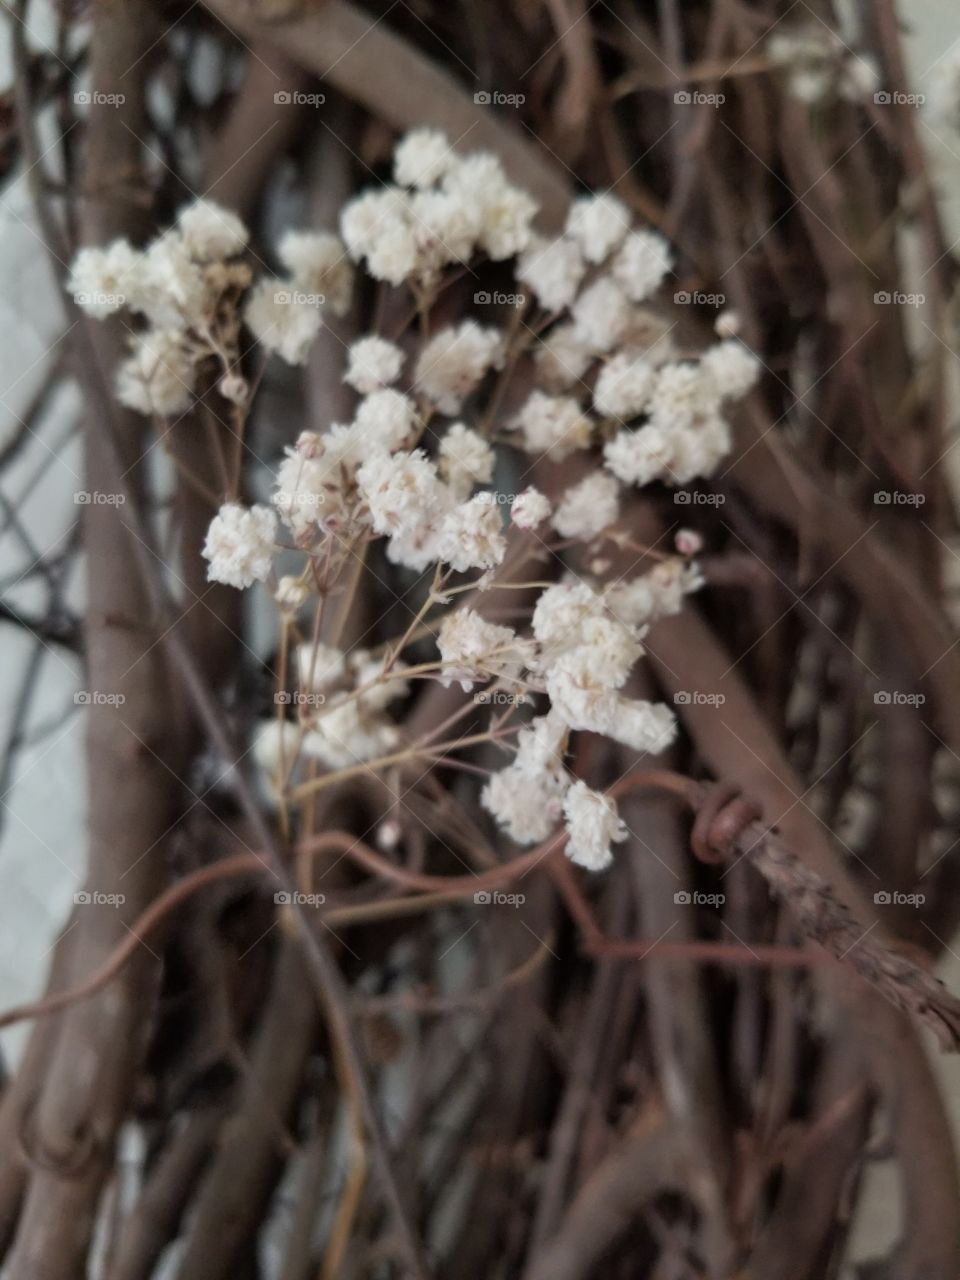 baby breath close up on a wreath of twigs,  nature did it best with accents